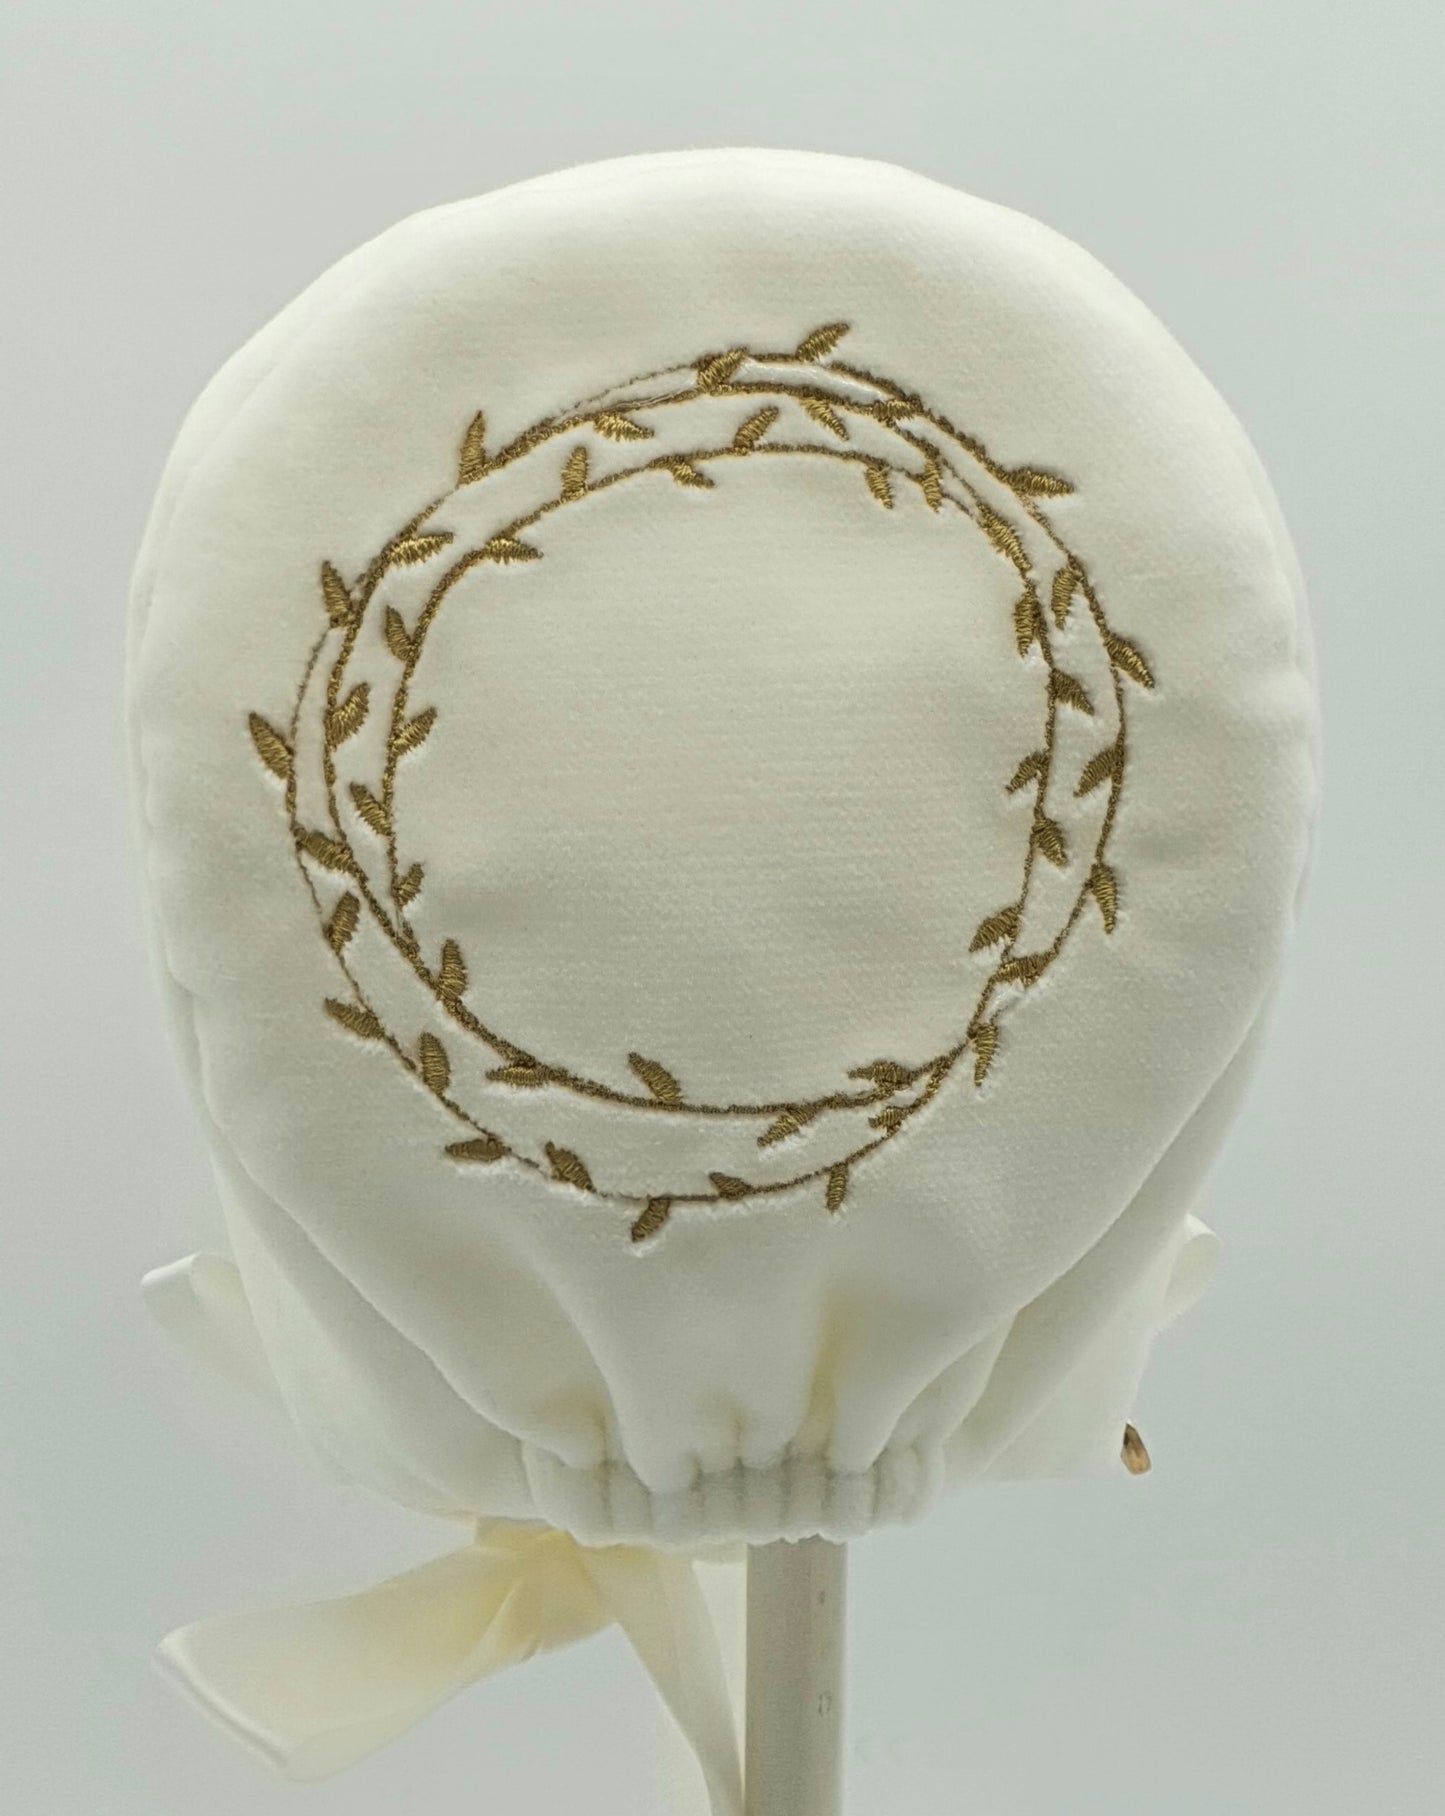 Exclusive Bonnet, Cream Velvet with Gold Embroidery & Trim